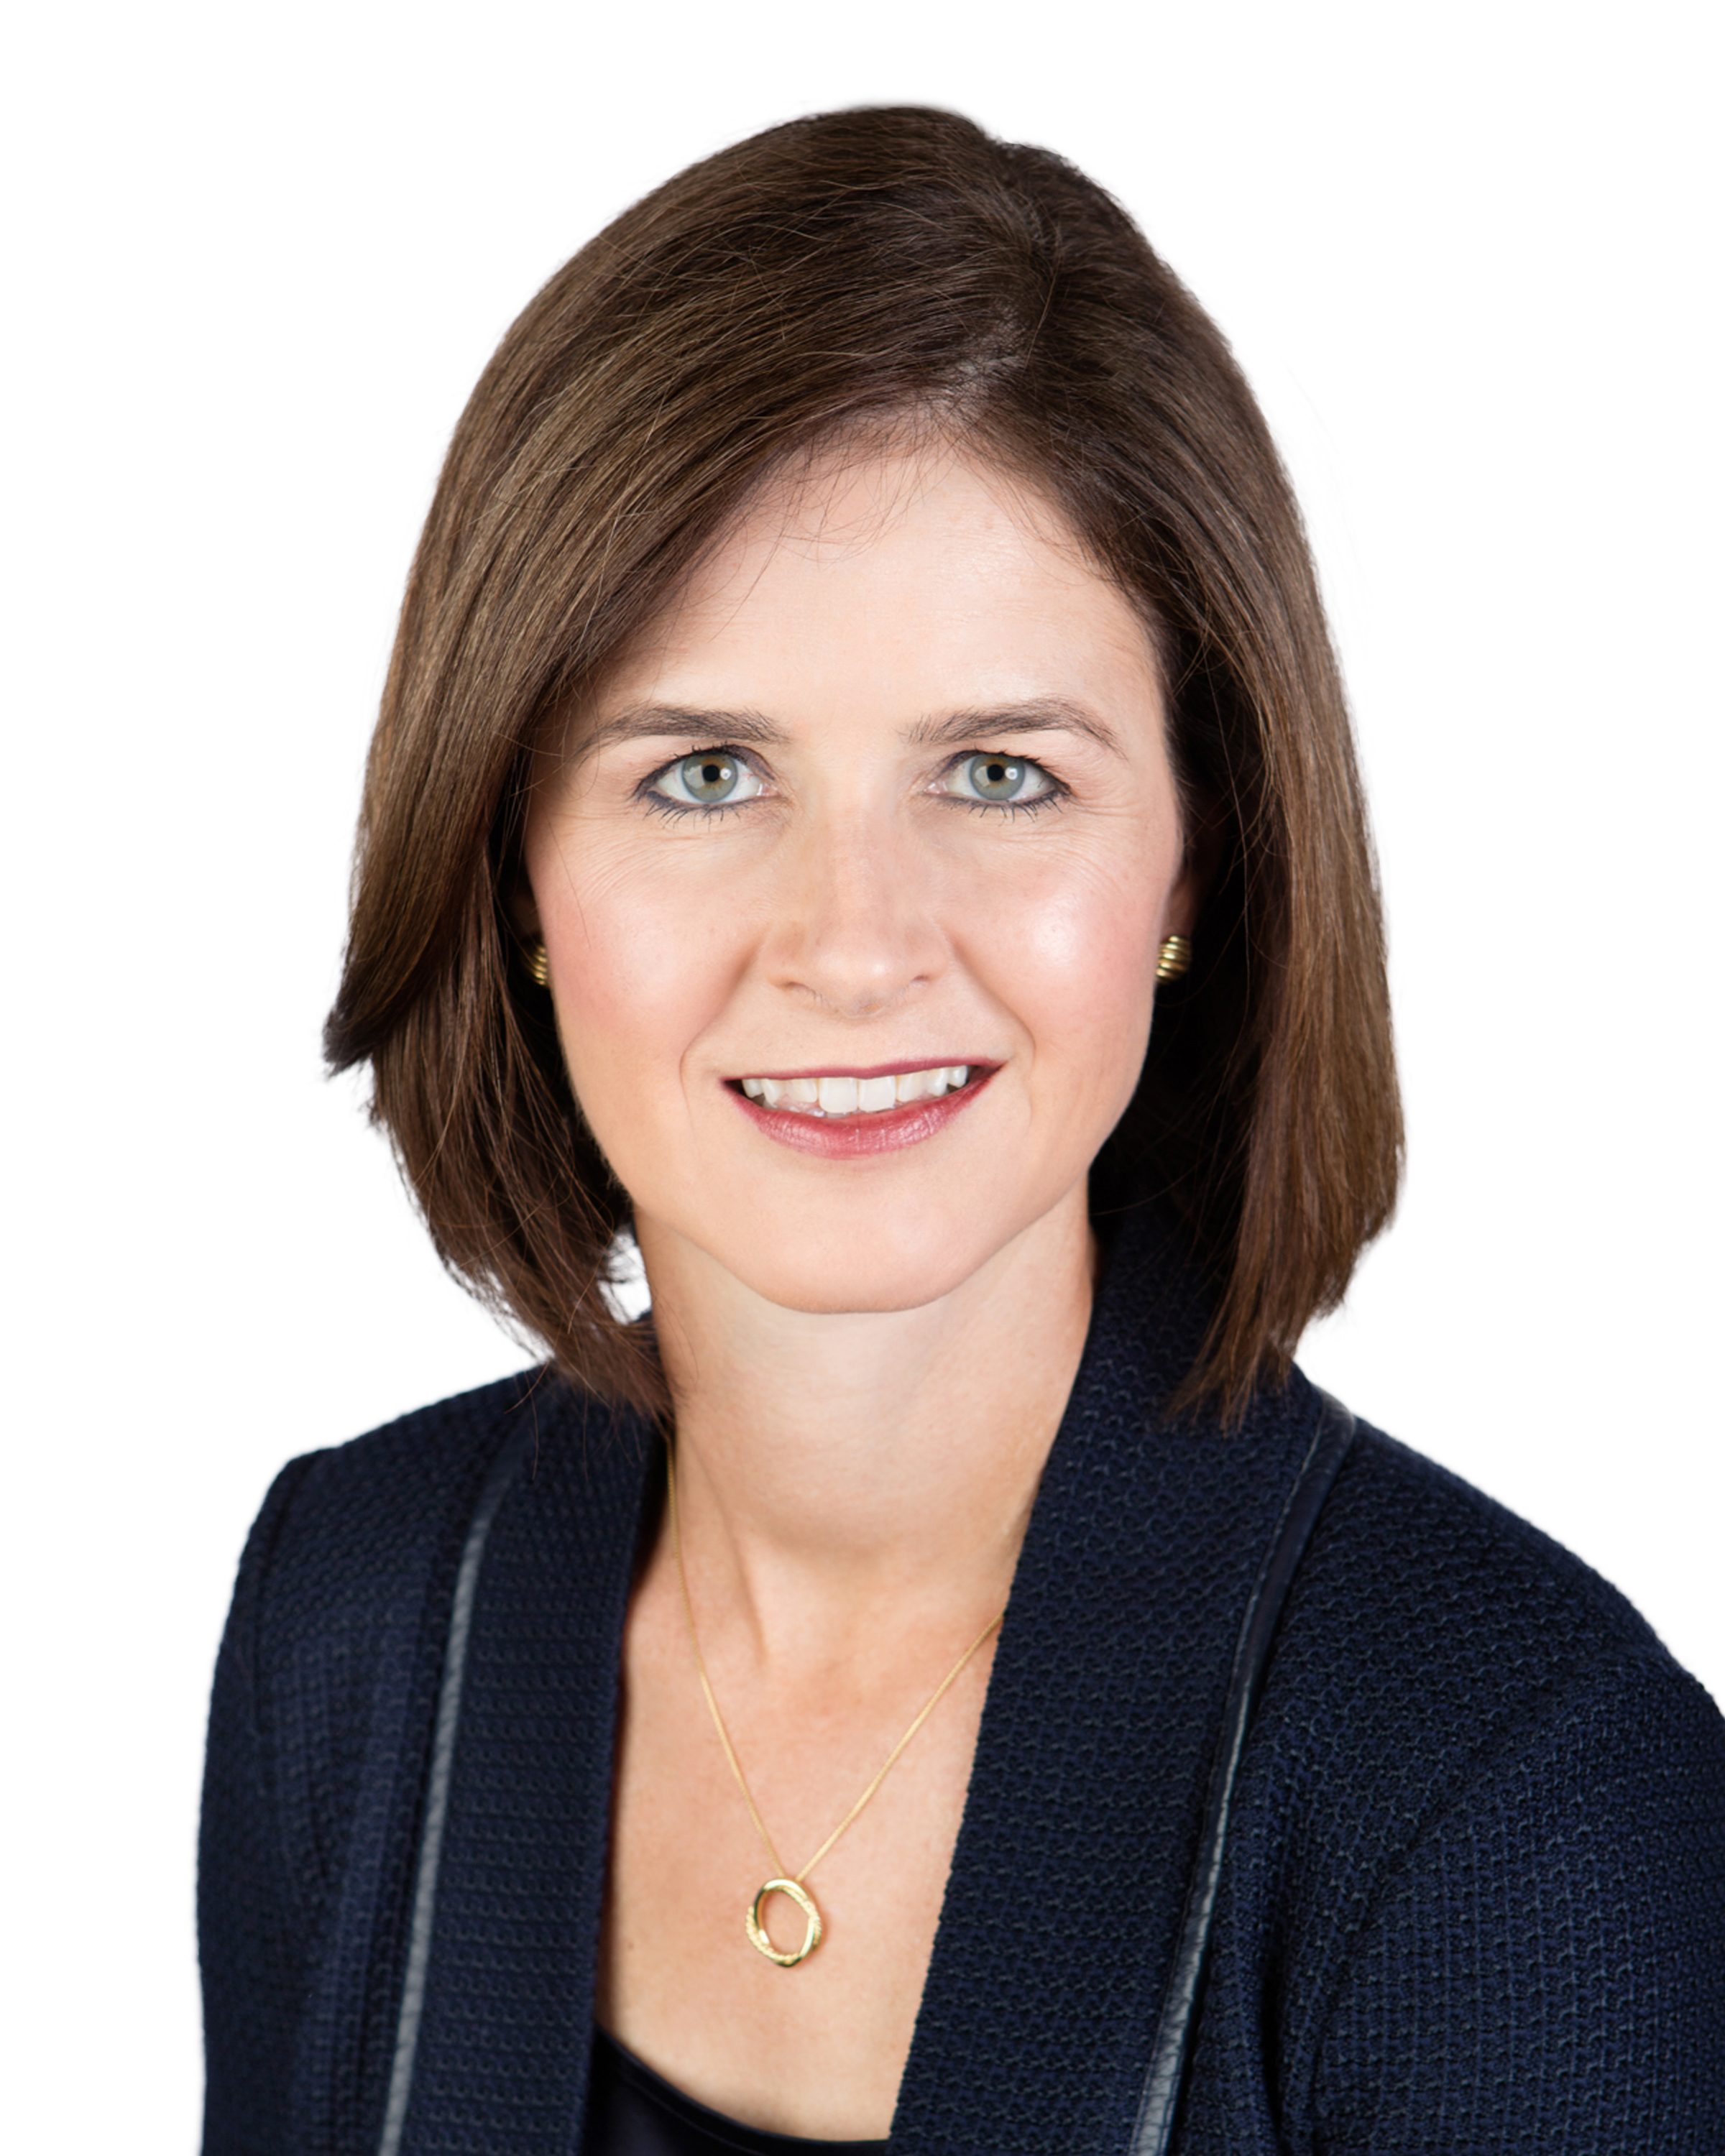 Dr. Catherine Corrigan is the CEO of Exponent